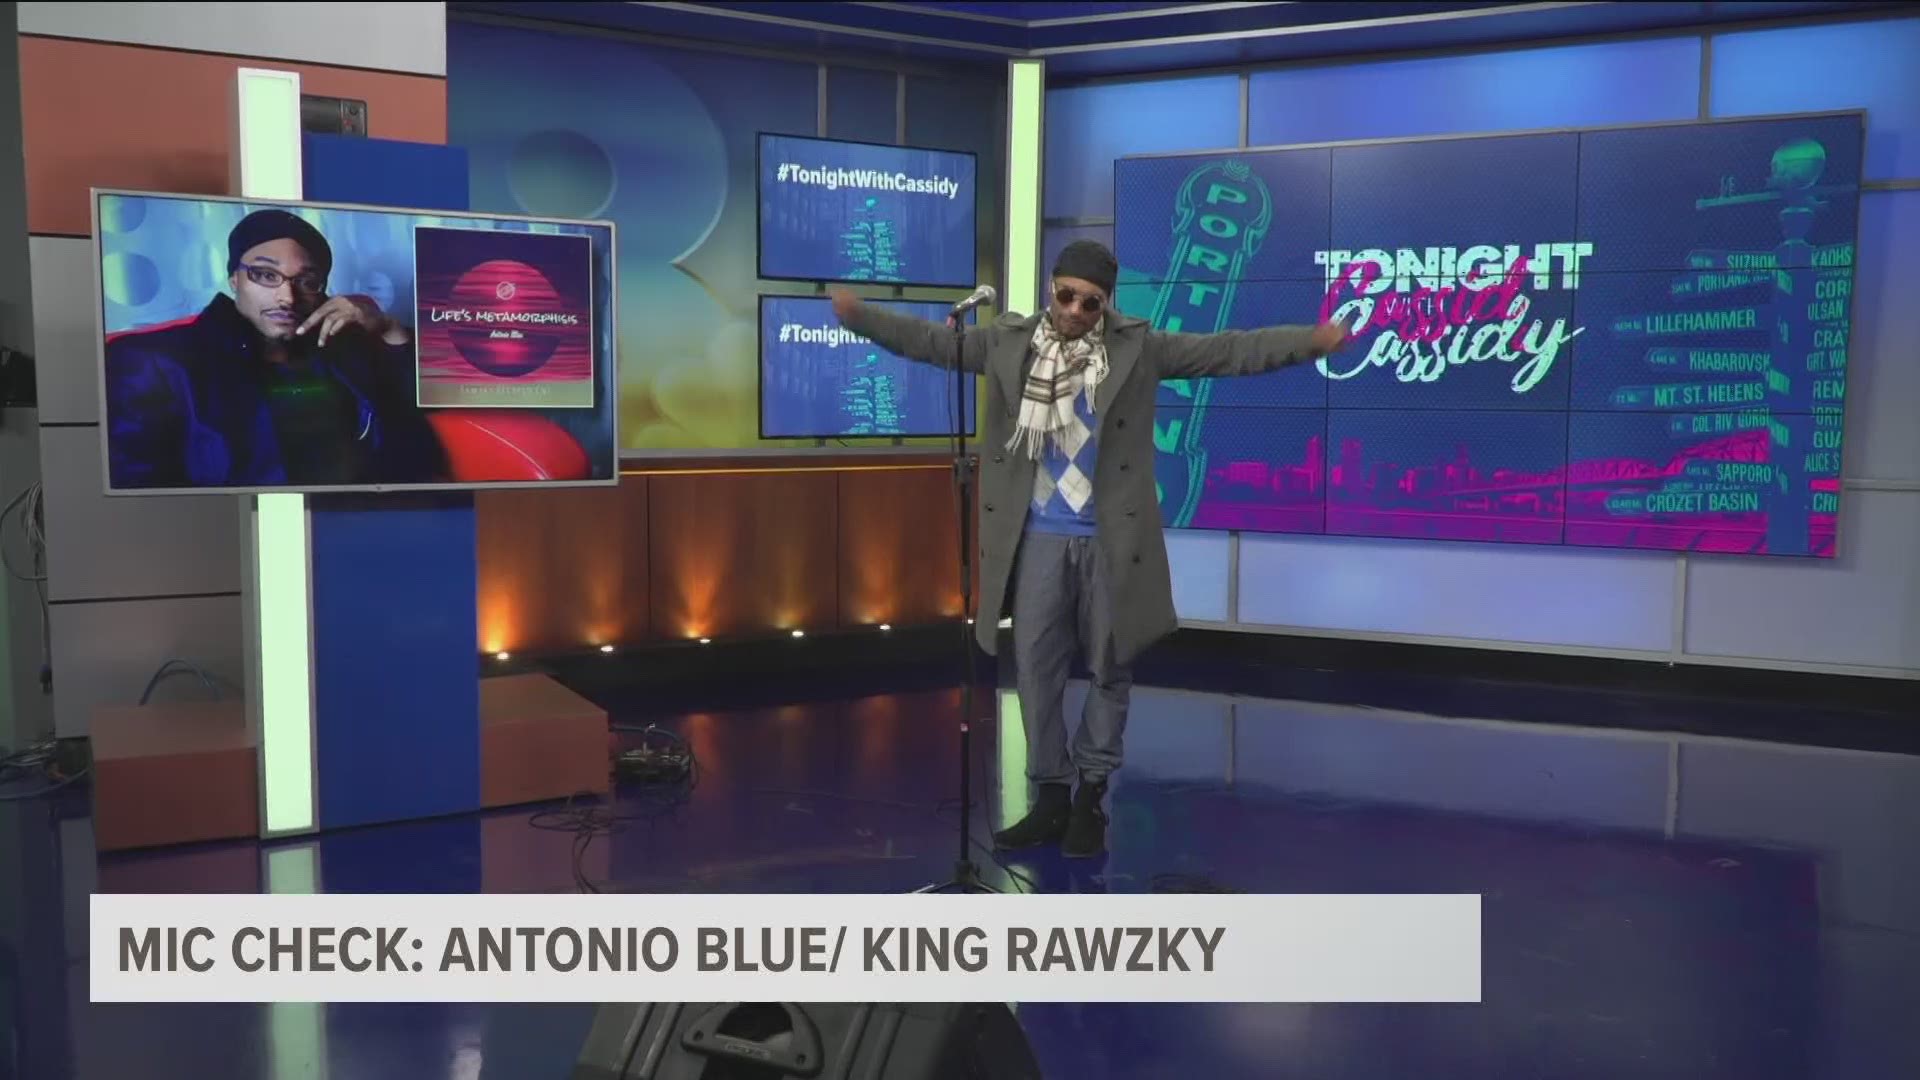 Check out Antonio Blue aka King Rawzky before he heads to Austin for a performance during SXSW.

rawzkyrecordsent.com